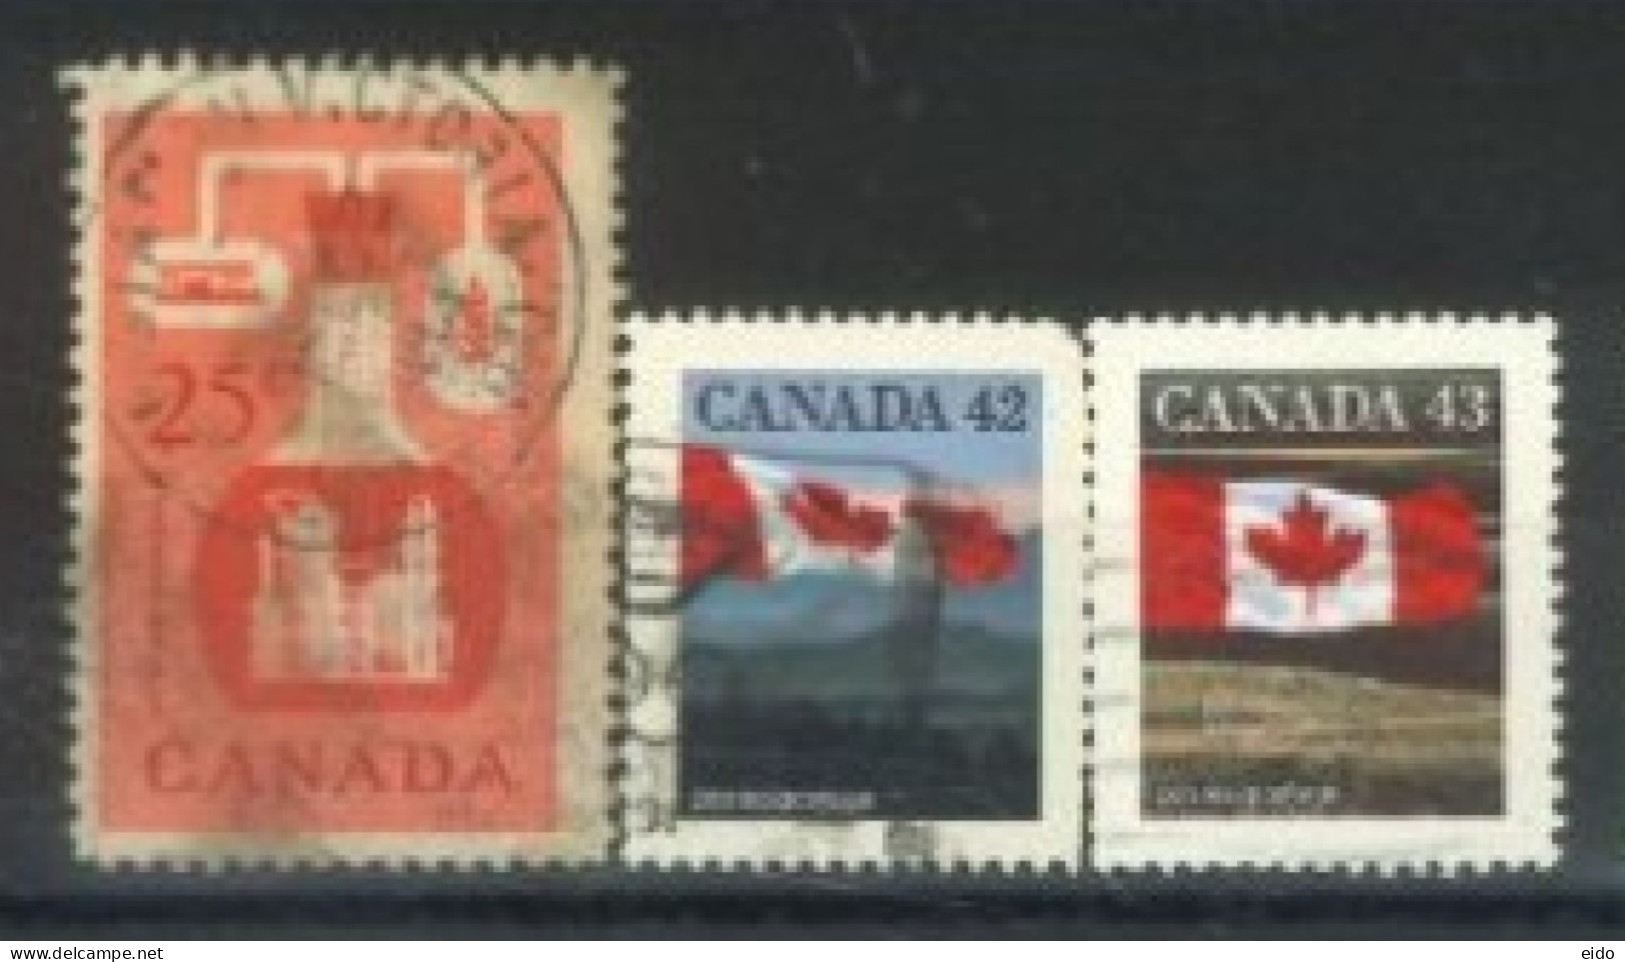 CANADA - STAMPS SET OF 3, USED. - Usados